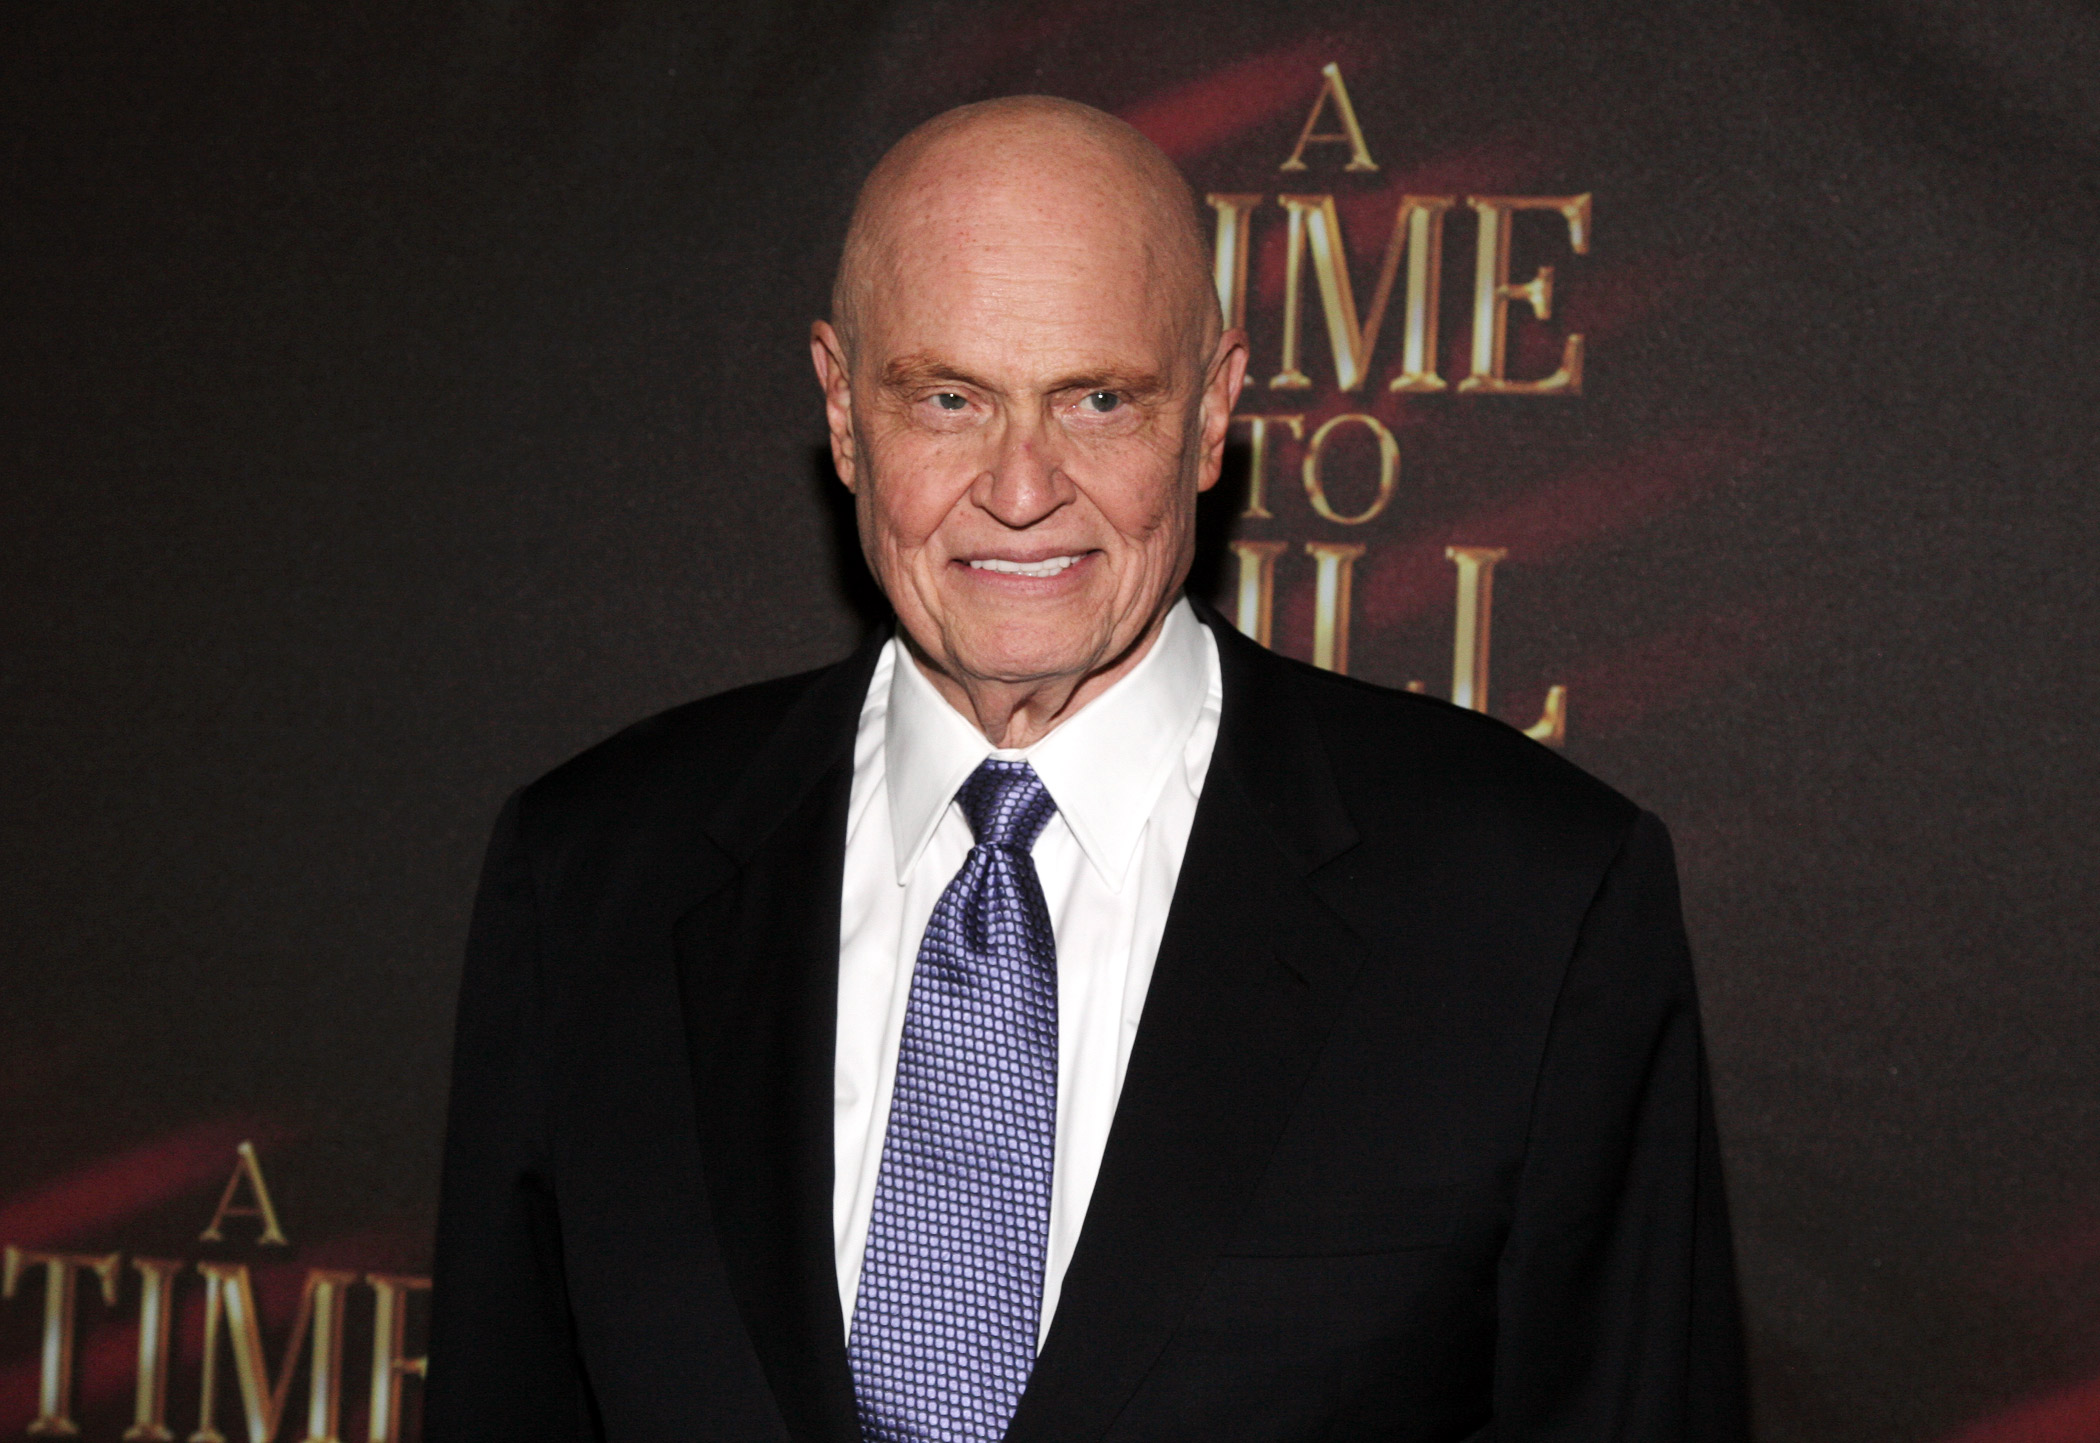 Actor and politician Fred Thompson attends the opening night party for  A Time To Kill  on Broadway on Oct. 20, 2013 in New York.